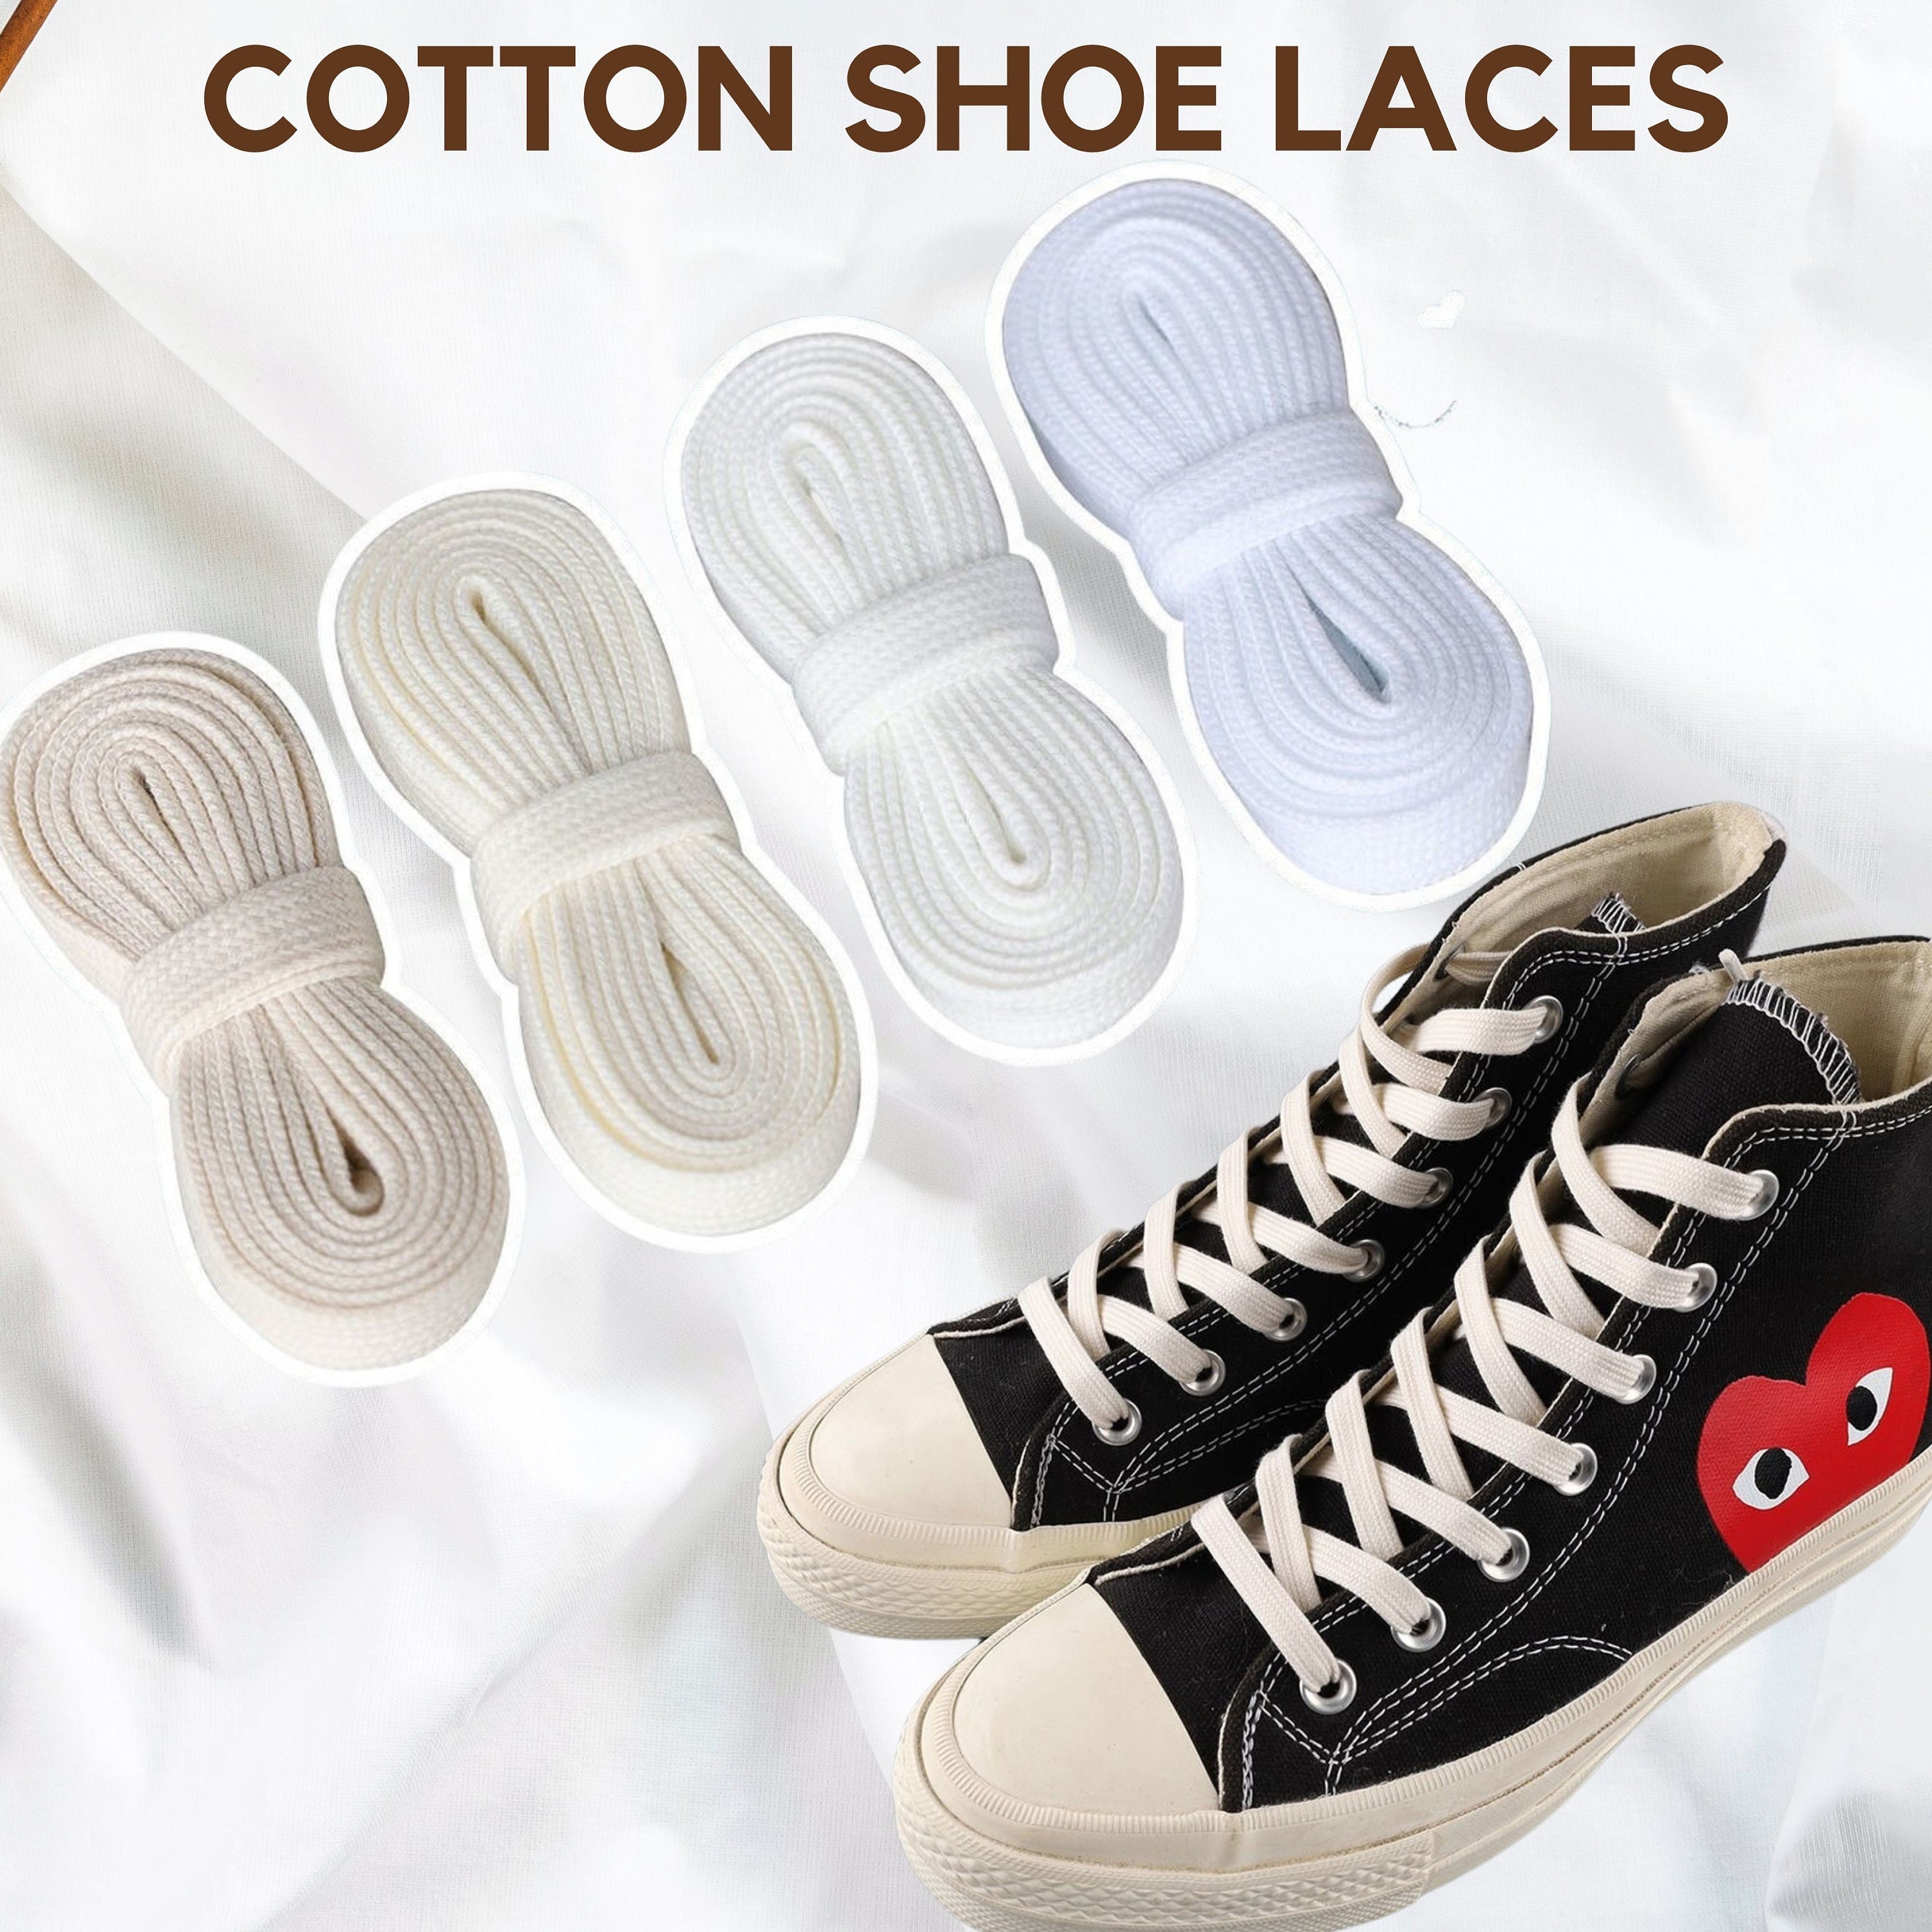 Cotton Shoe Laces for Sneakers White Beige - Etsy